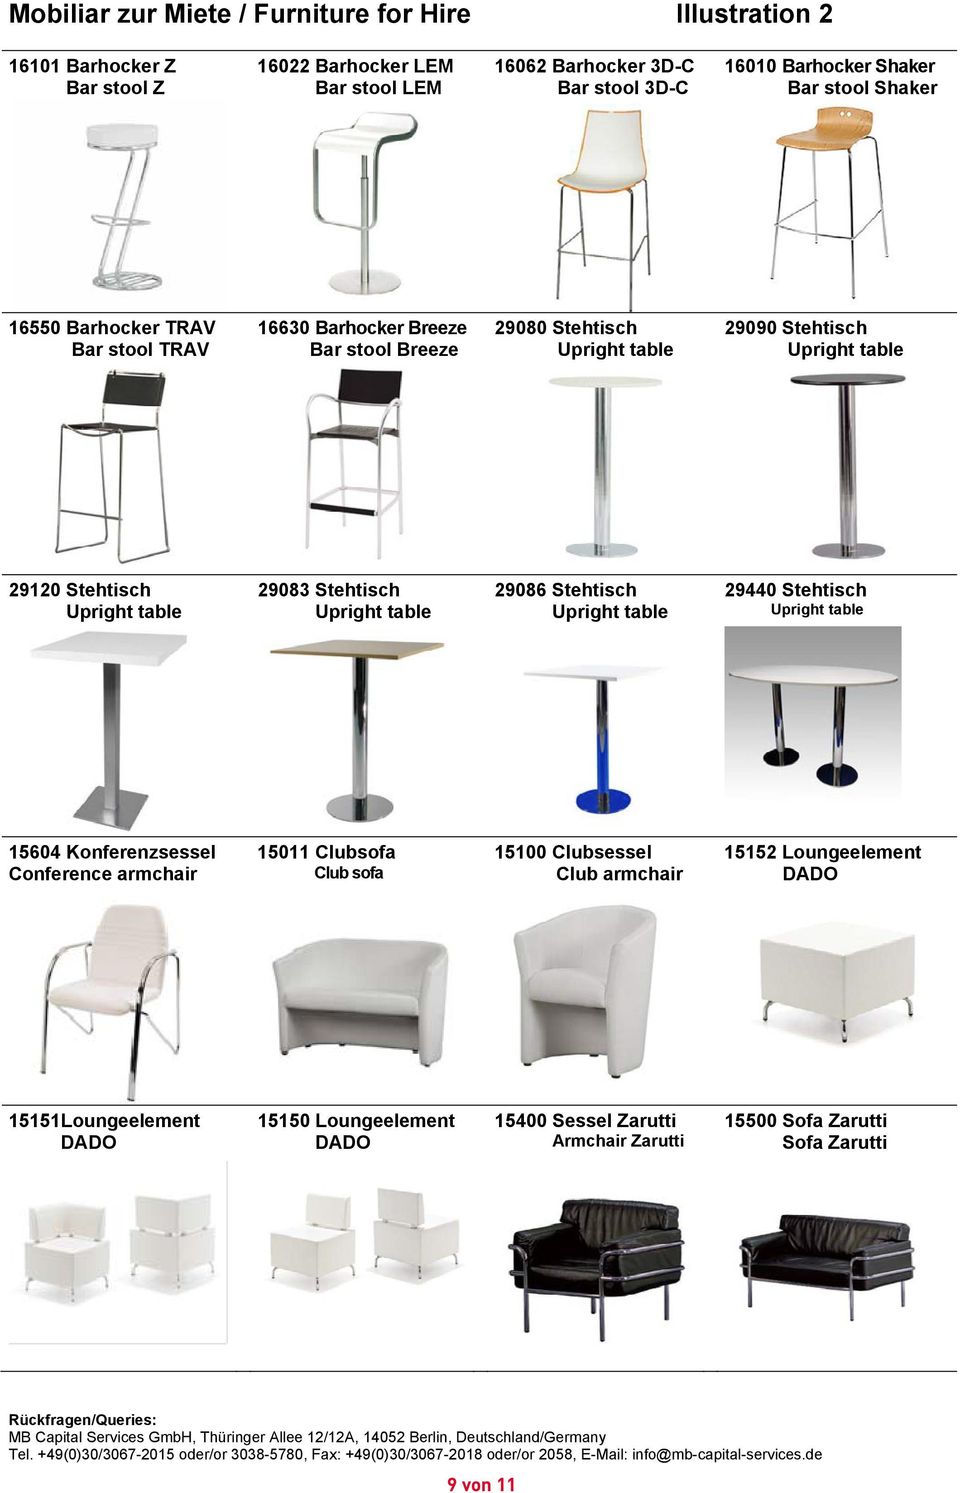 Upright table Upright table Upright table Upright table 15604 Konferenzsessel 15011 Clubsofa 15100 Clubsessel 15152 Loungeelement Conference armchair Club sofa Club armchair DADO 15151Loungeelement